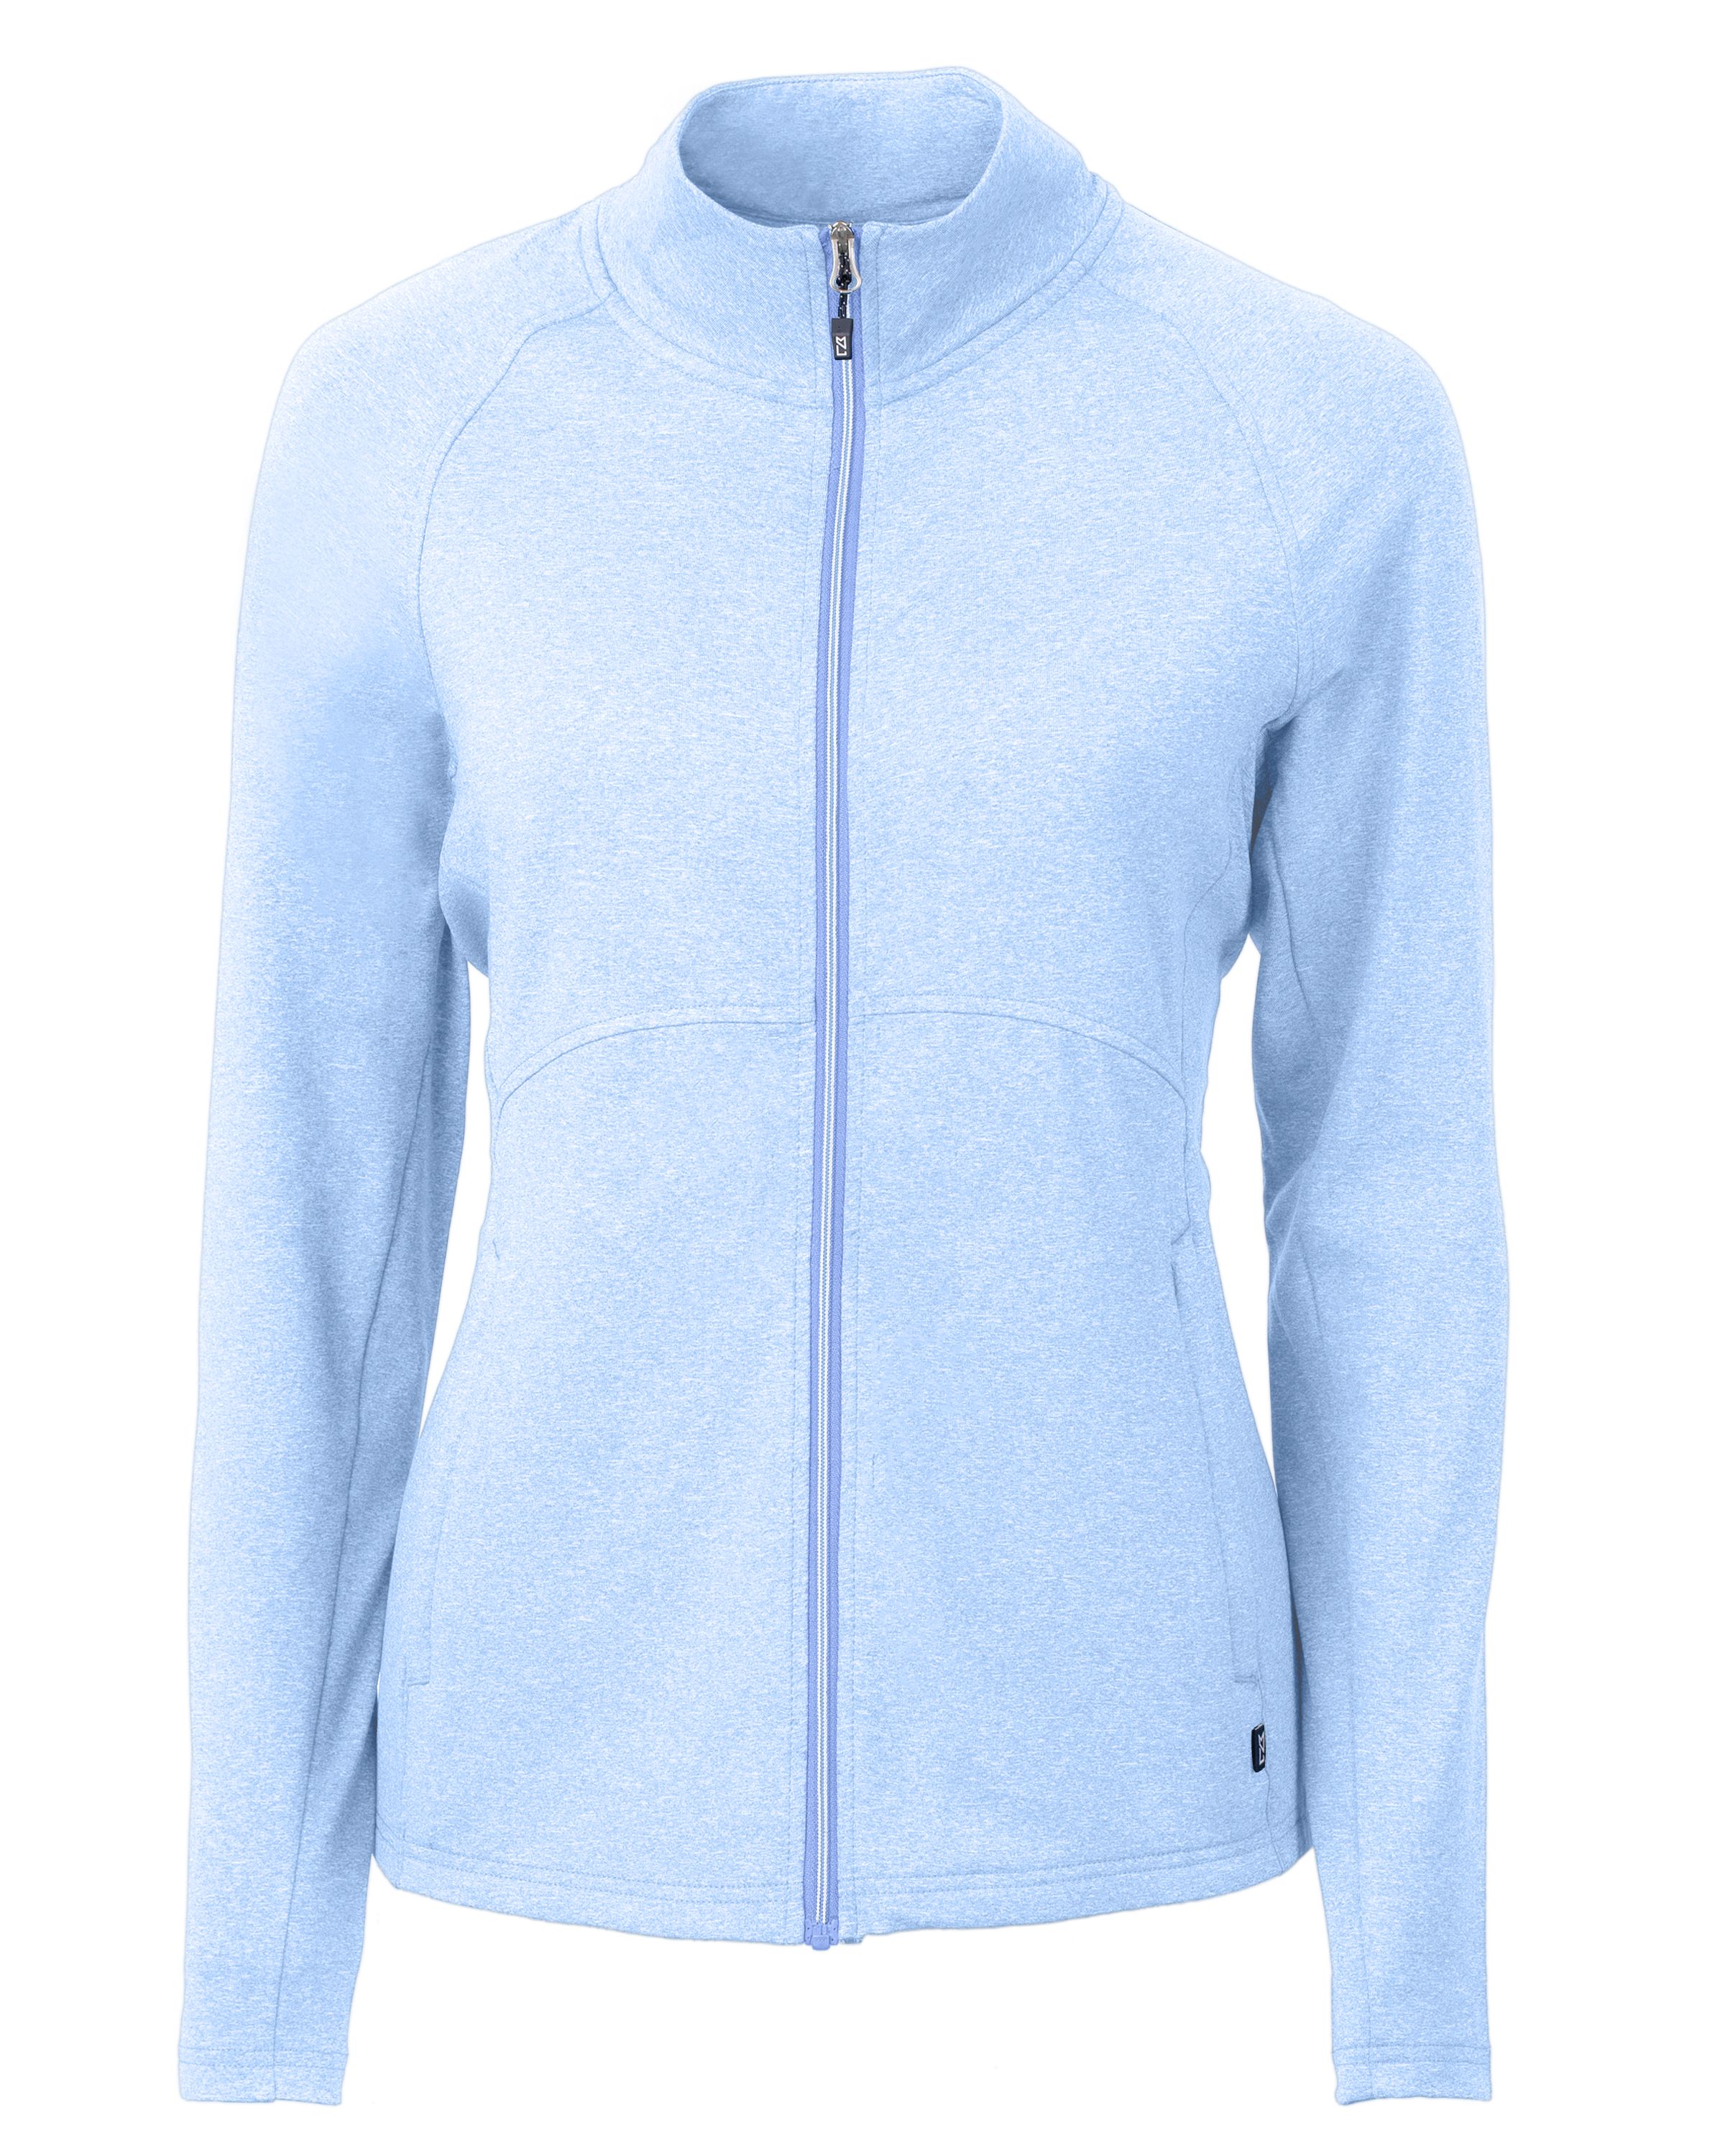 CUTTER & BUCK LCK00151 - Women's Adapt Eco Knit Heather Recycled Full Zip